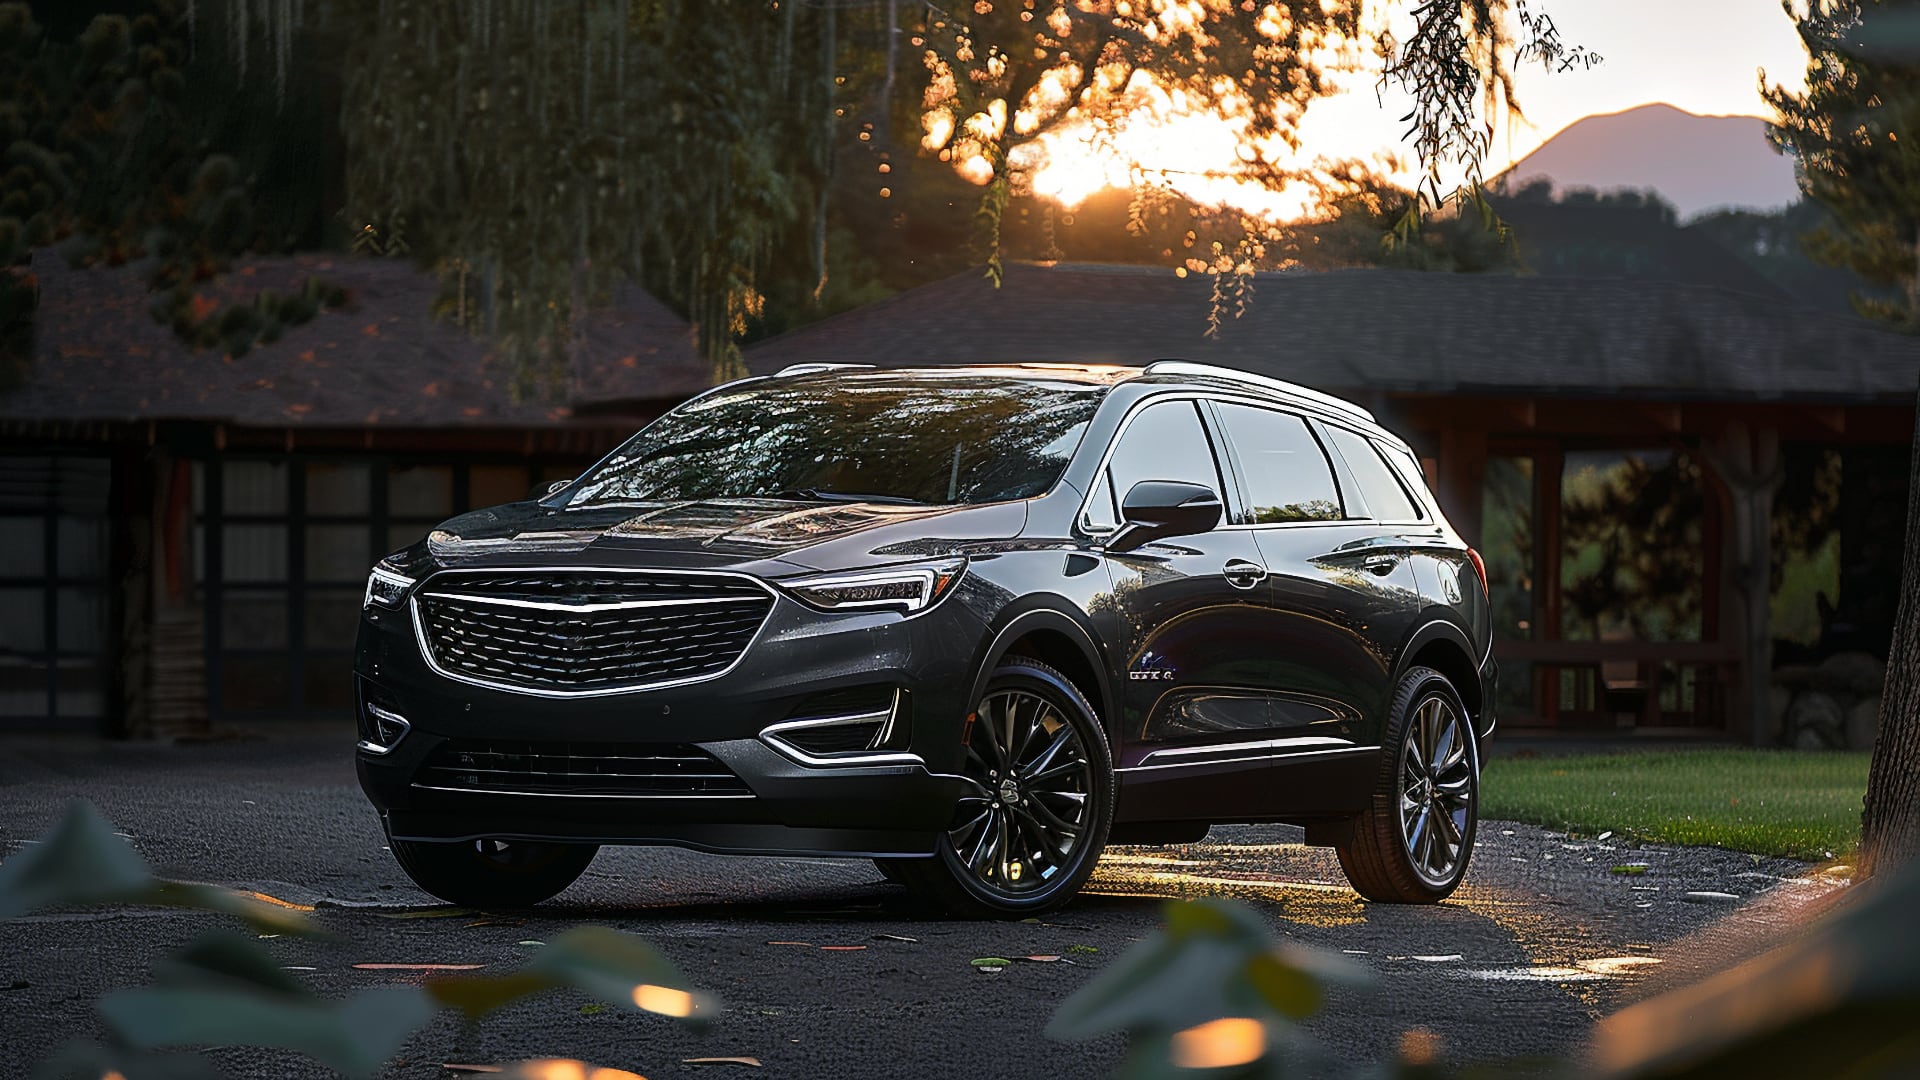 The 2020 Buick Enclave, one of the years to avoid, is parked in front of a house.